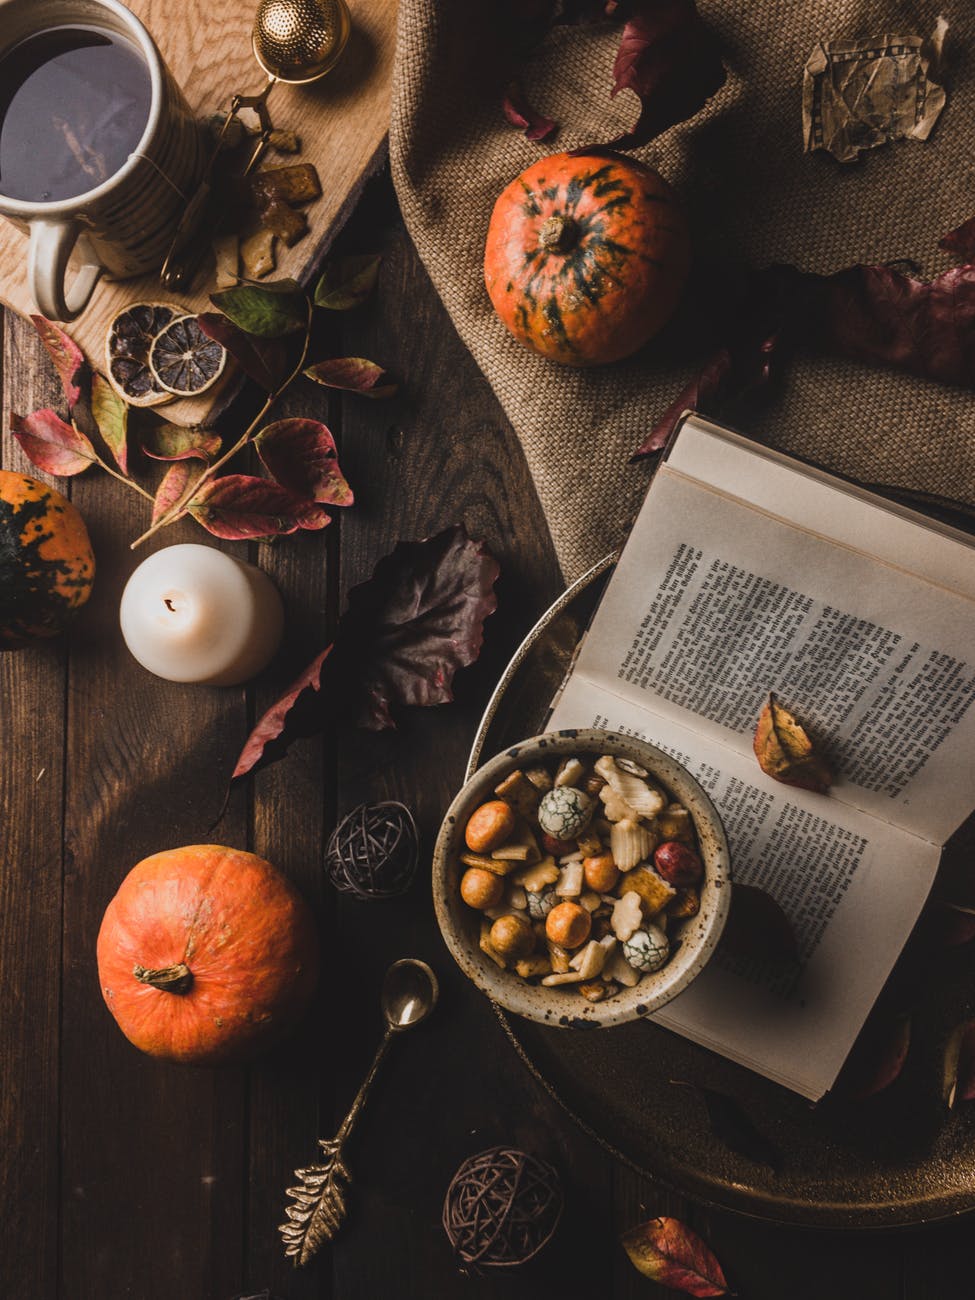 book with pumpkins and other fall decorations